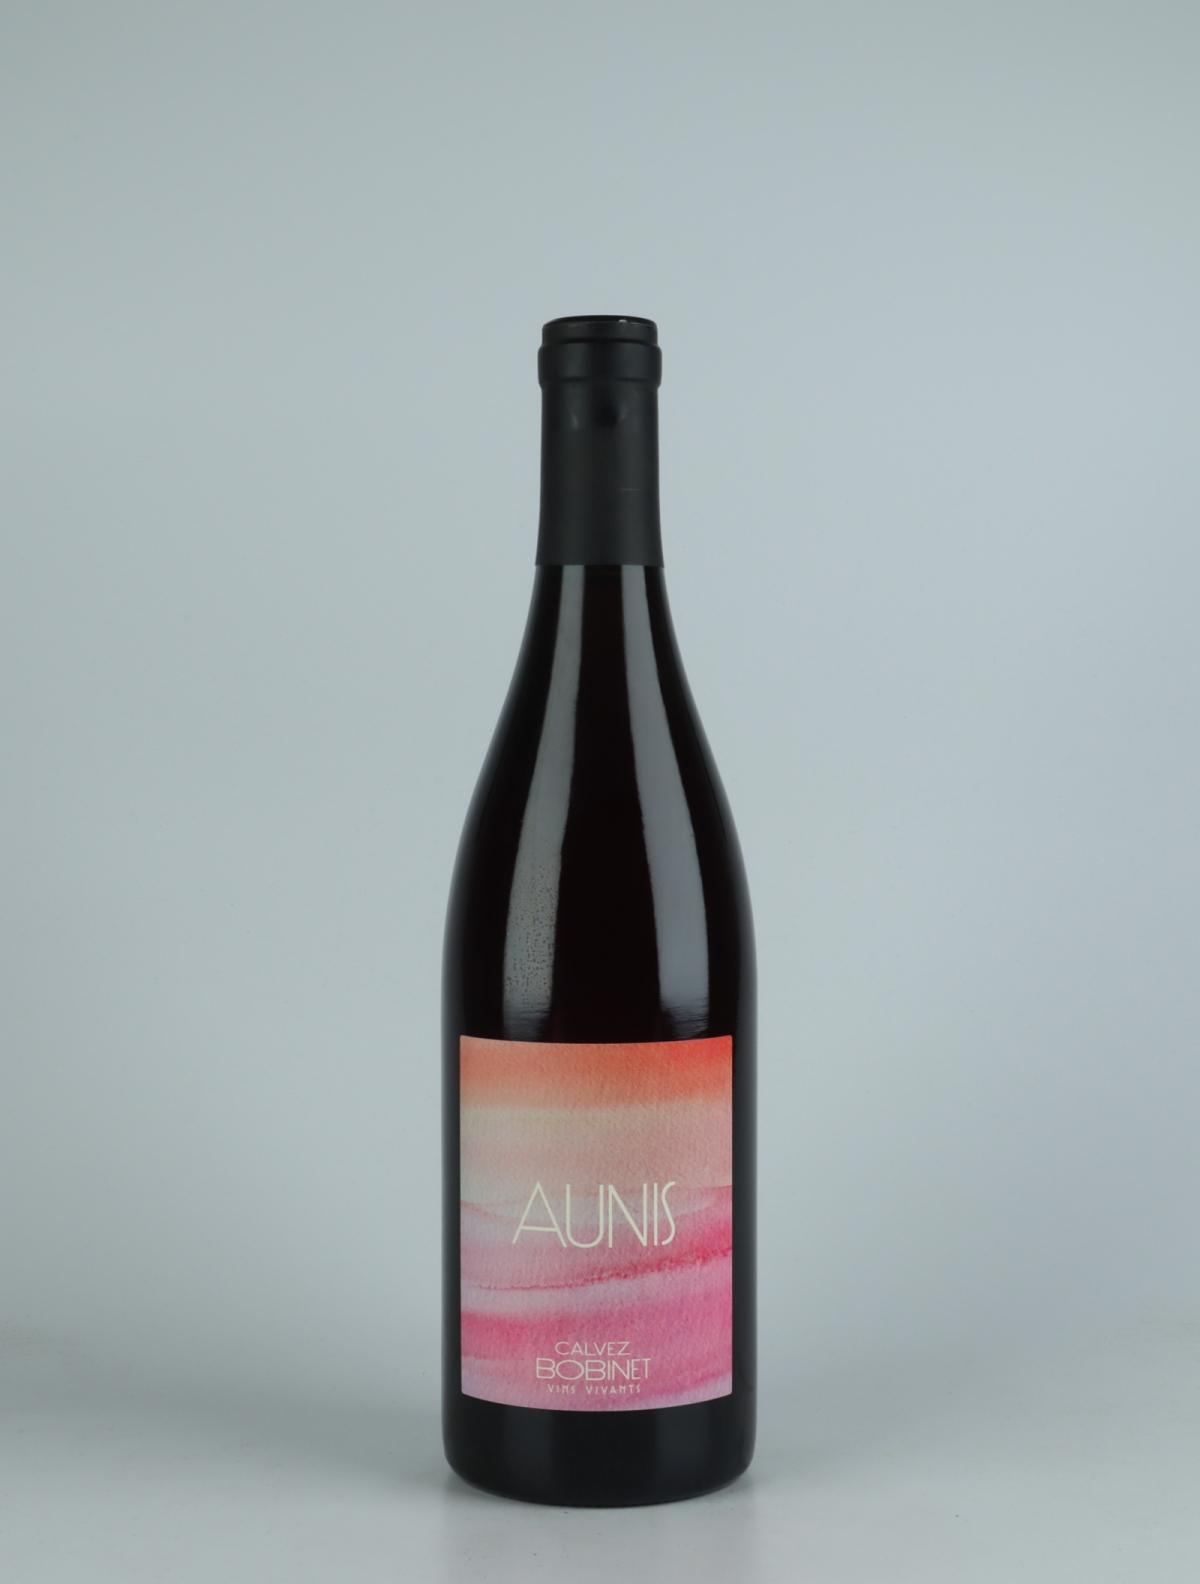 A bottle  Aunis Red wine from Domaine Bobinet, Loire in France